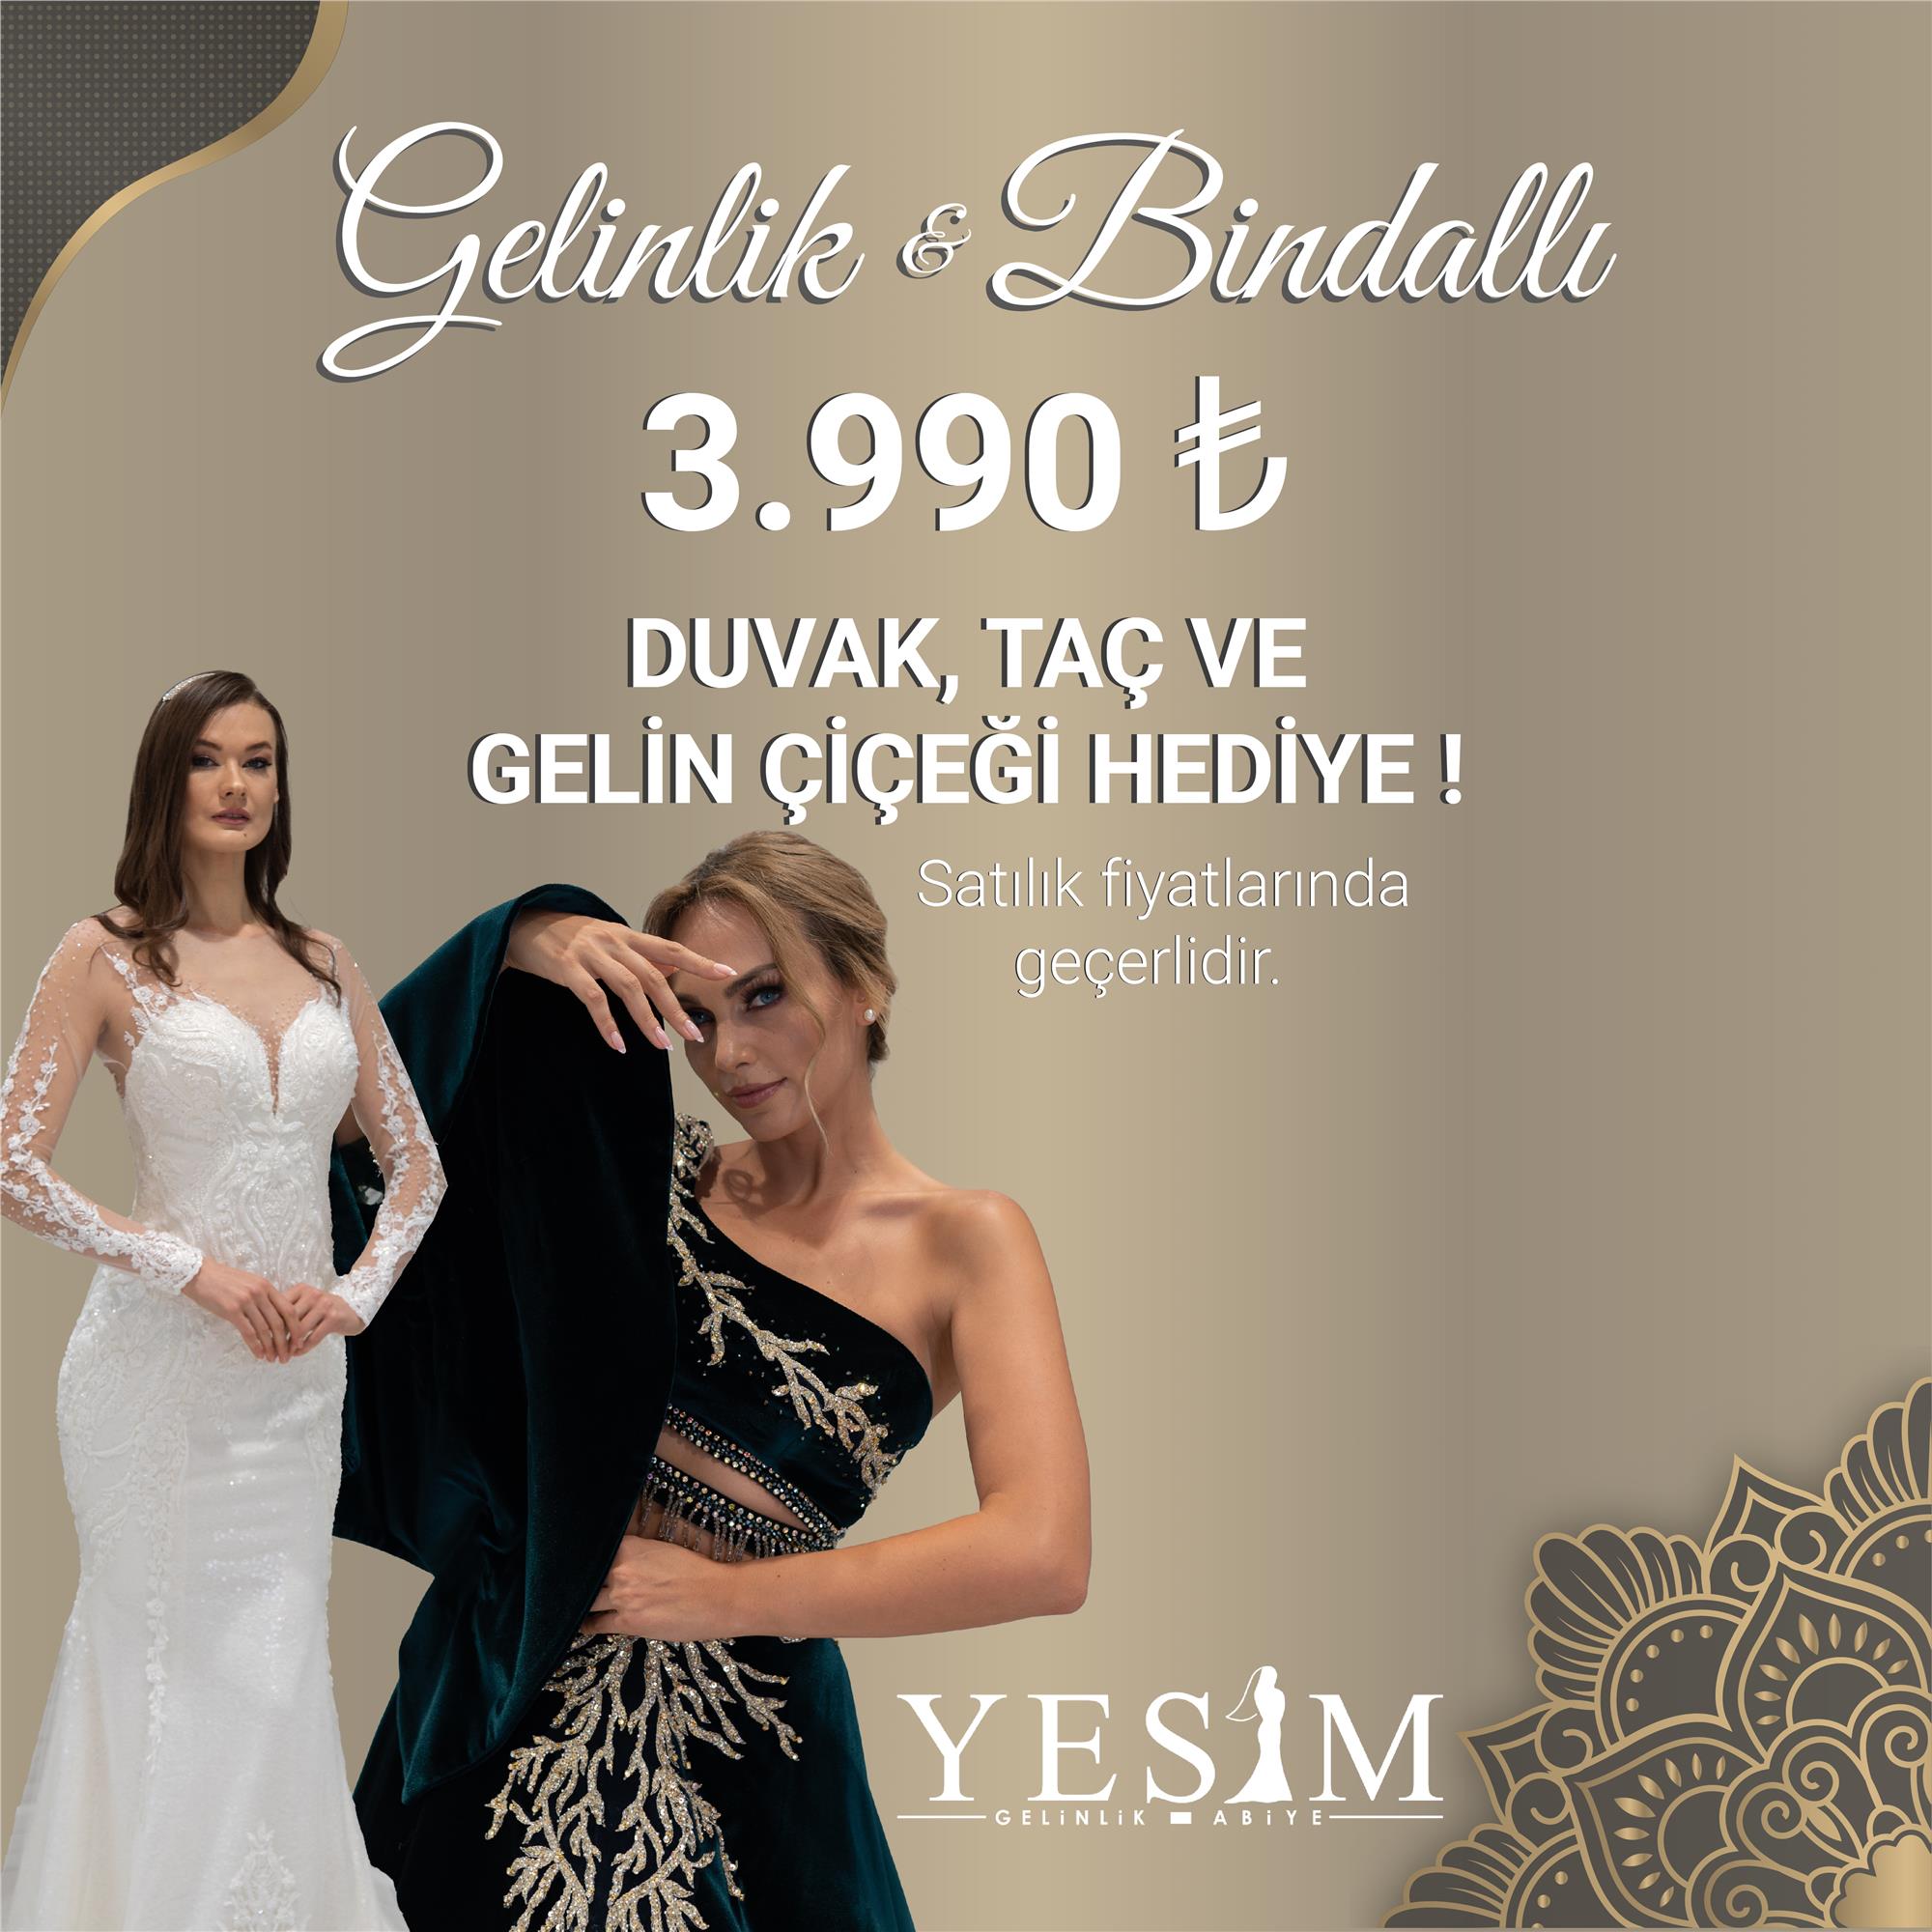 Click Now for Your Dream Wedding Dress